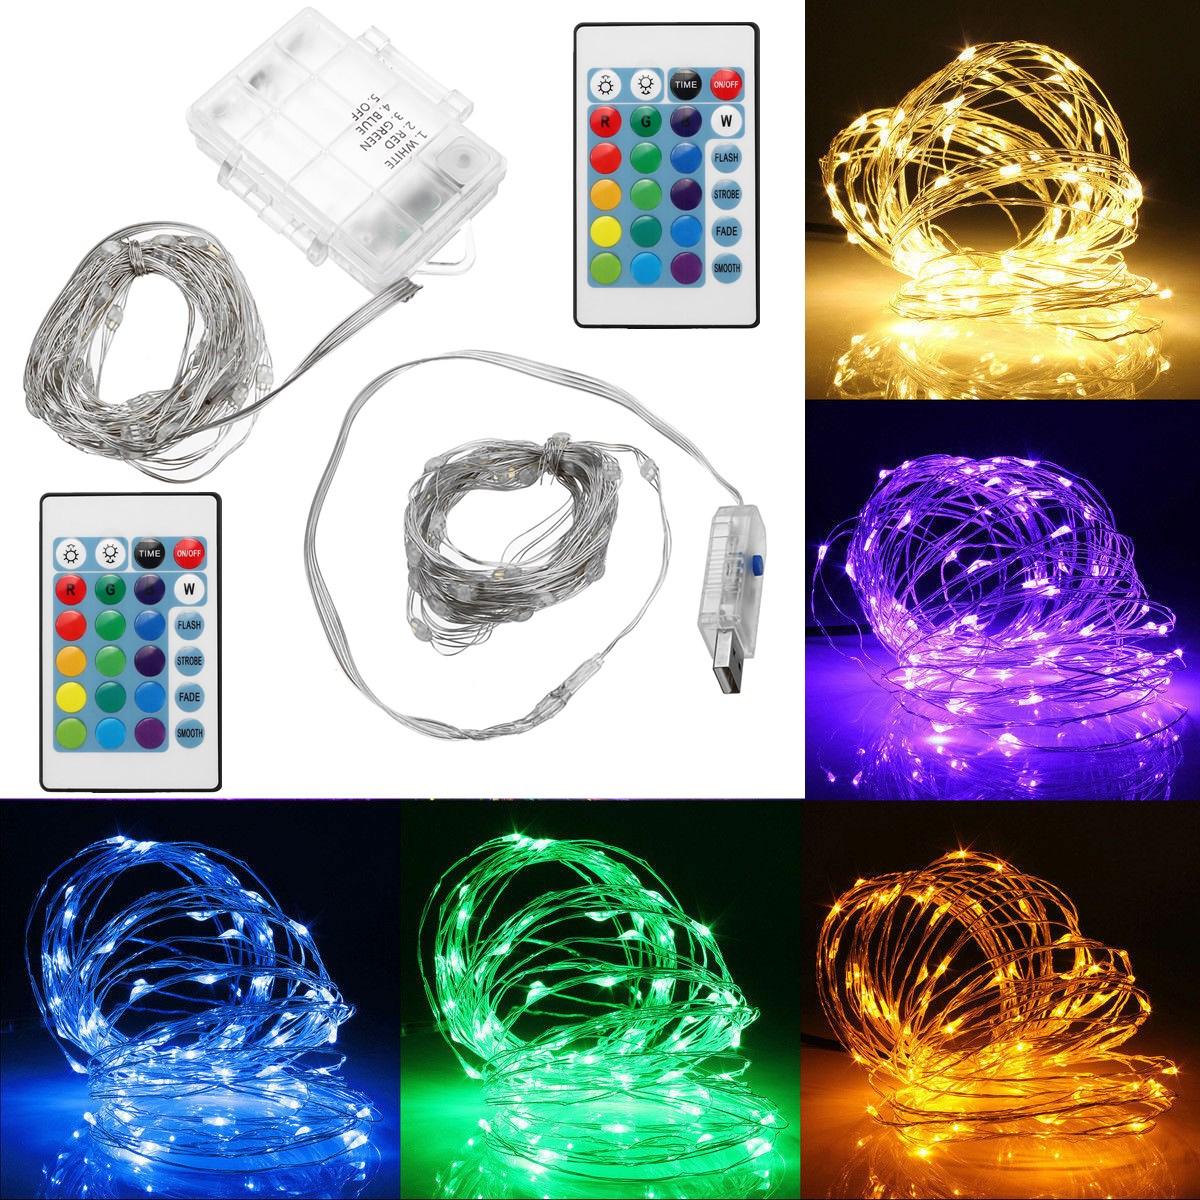 

Battery Operated USB Powered Waterproof 5M 50LED Colorful Sliver Wire String Light + 24Keys Remote Control for Holiday